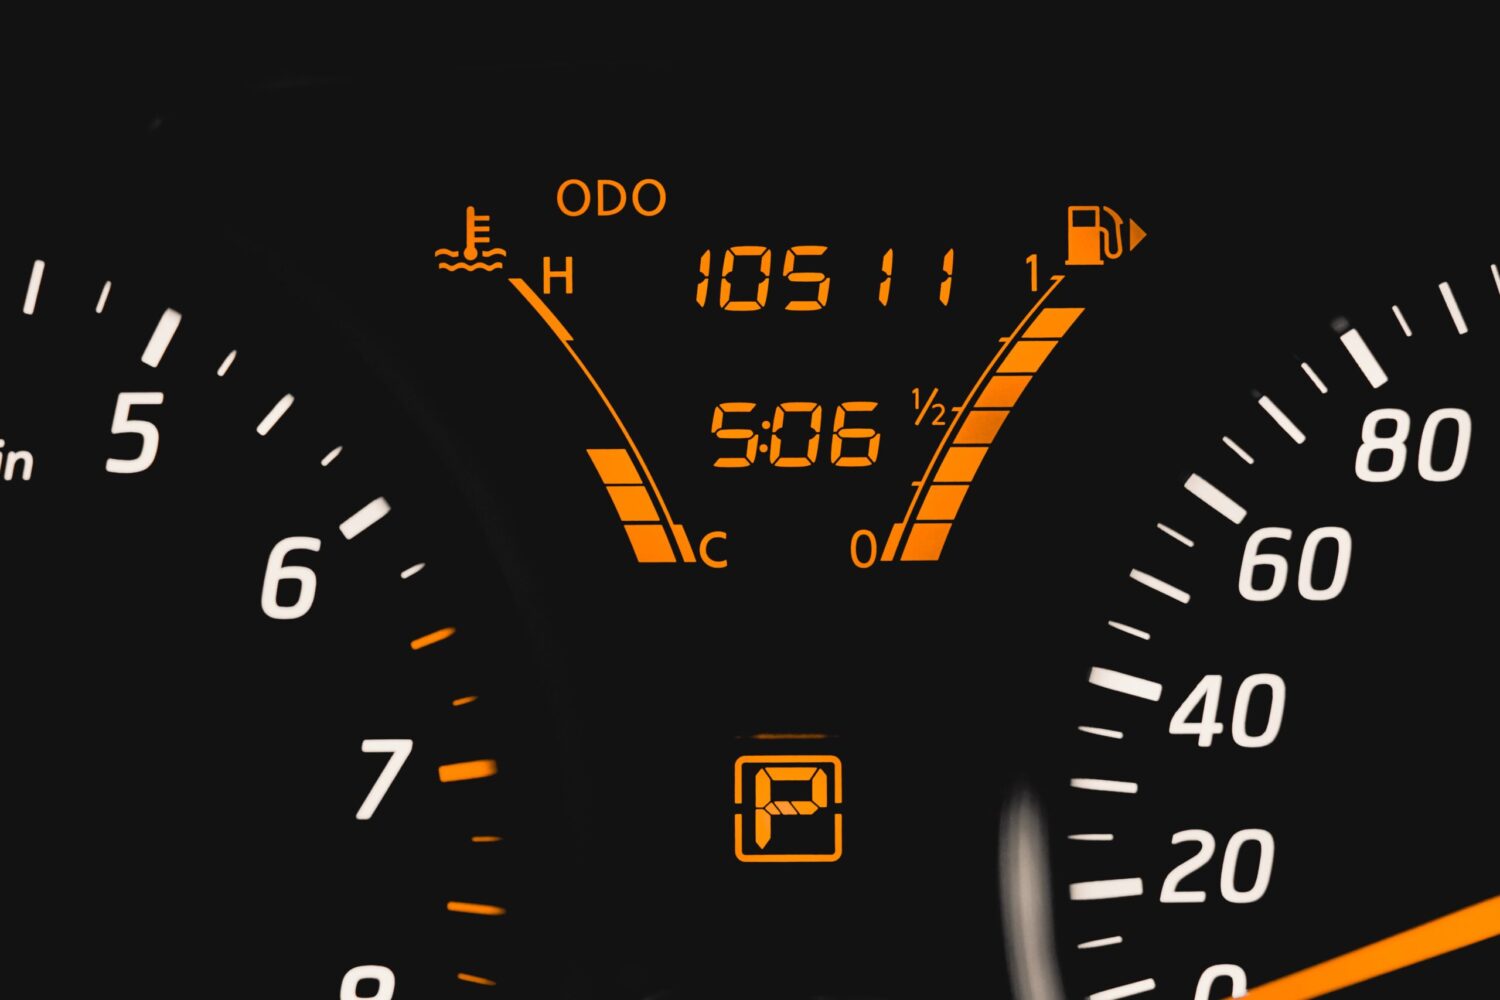 Arrow in Fuel Gauge shows the fuel cap is located on the right side of the vehicle.